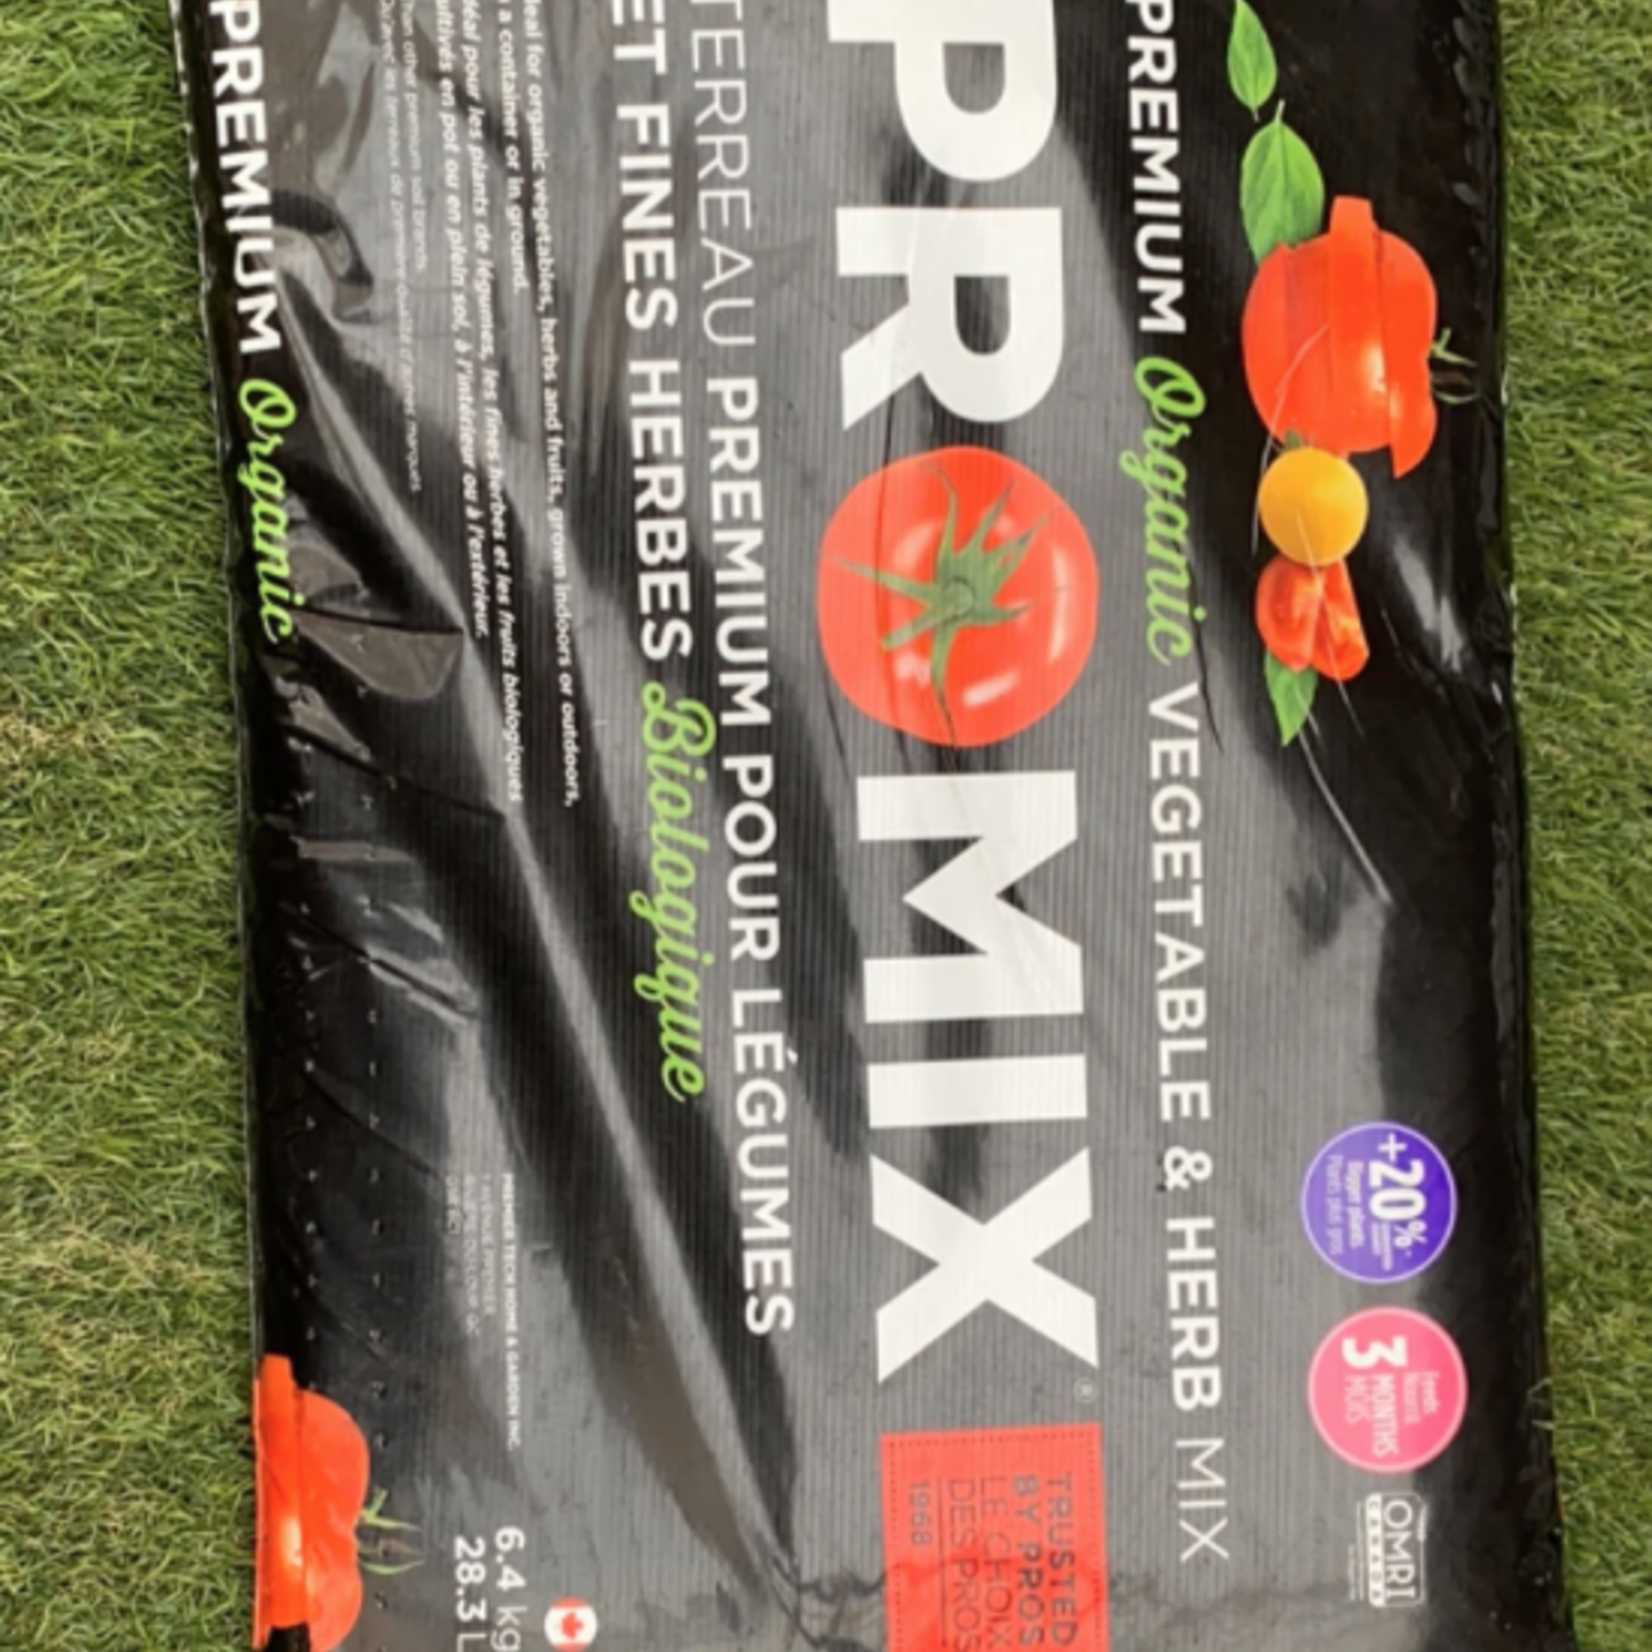 Pro Mix Organic Vegetable and Herb 28.3L